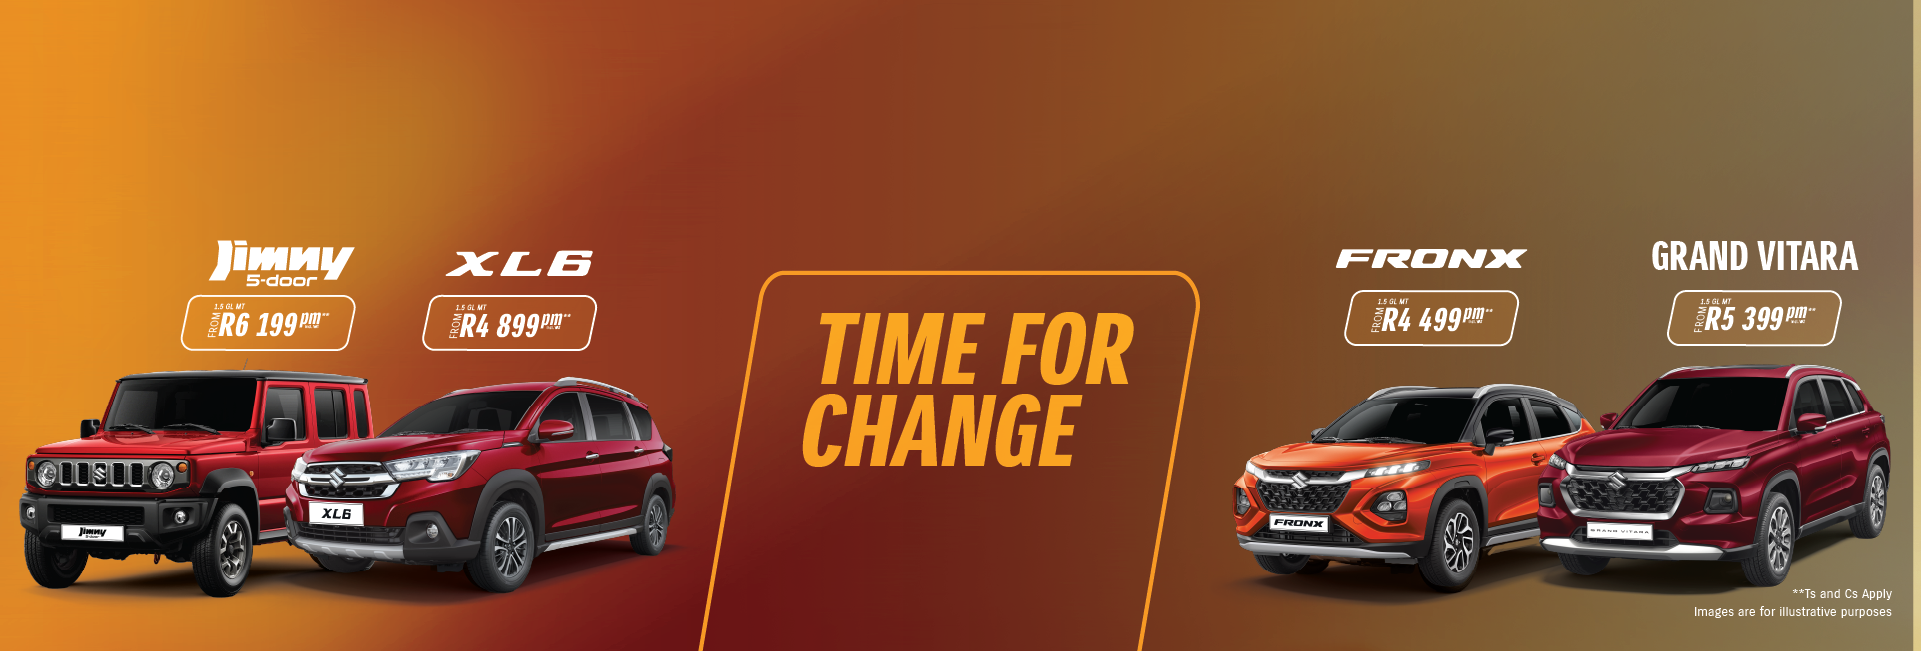 Time For Change with Suzuki 